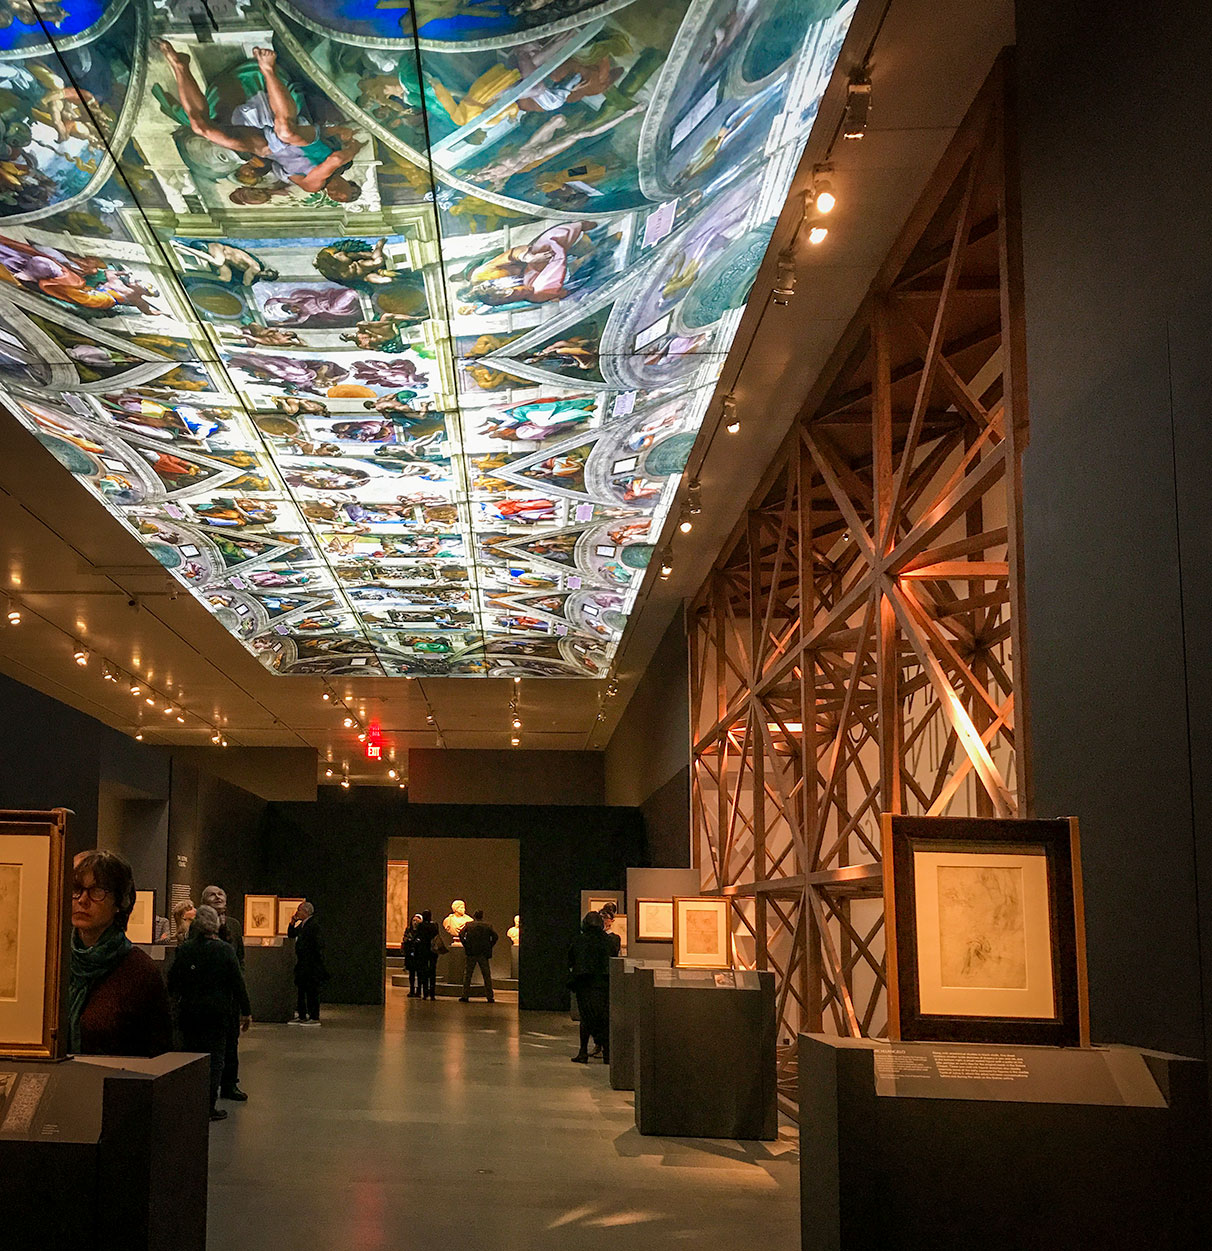 The Sistine Chapel ceiling: an illuminated copy at 1:4 scale of the original displayed in the exhibit Michelangelo Divine Draftsman and Designer exhibit at the Metropolitan Museum of Art in New York